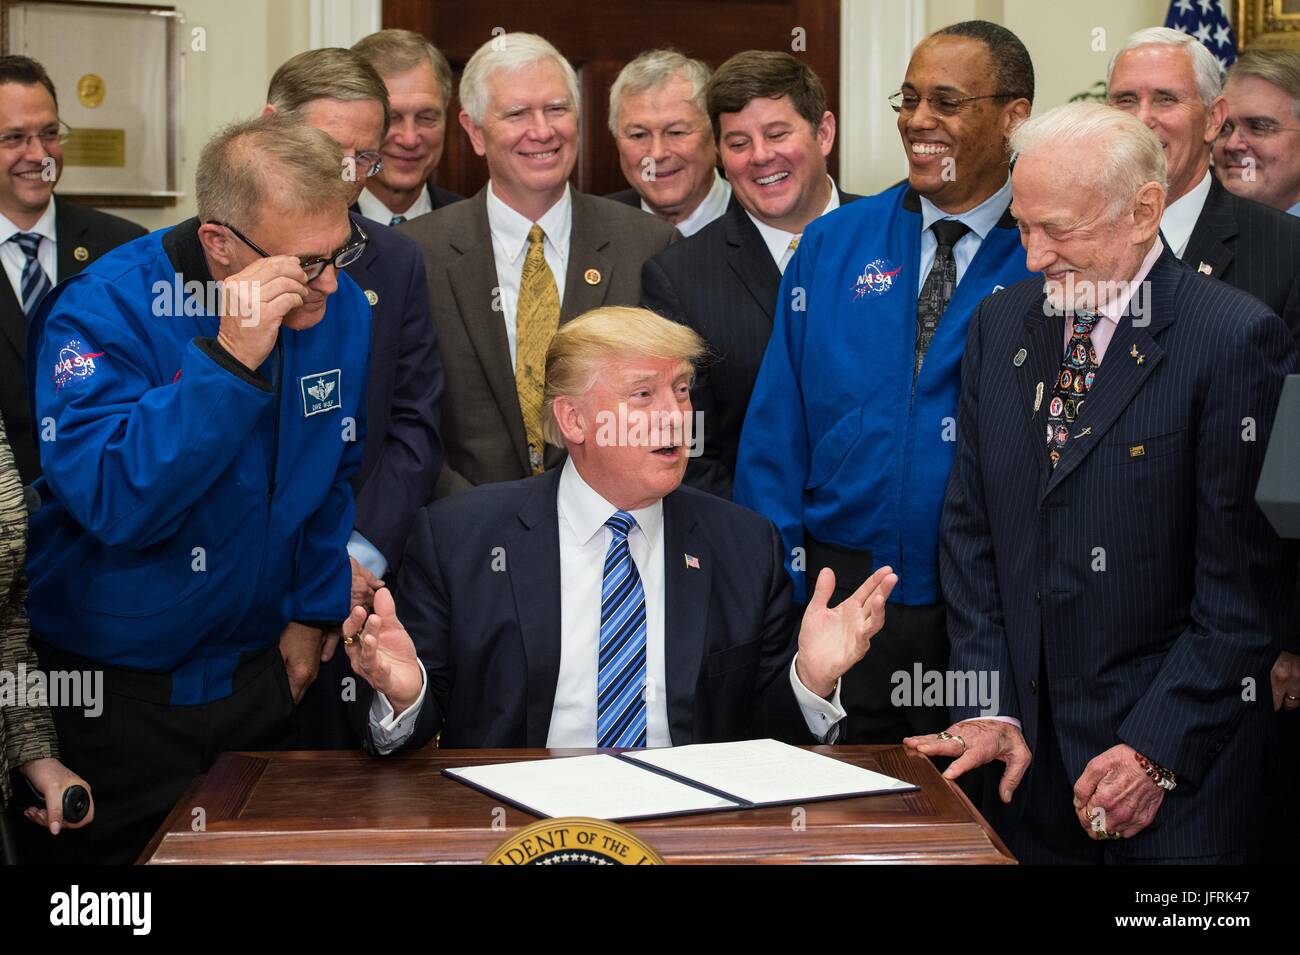 U.S President Donald Trump surrounded by members of the Congress, Astronauts, and Commercial Space Companies comments before signing an Executive Order to reestablish the National Space Council in the Roosevelt room of the White House June 30, 2017 in Washington, DC. Vice President Mike Pence, also in attendance, will chair the council. Also pictured are retired NASA astronaut David Wolf, left, Astronaut Alvin Drew, second from right, and retired NASA astronaut legend Buzz Aldrin, right. Stock Photo